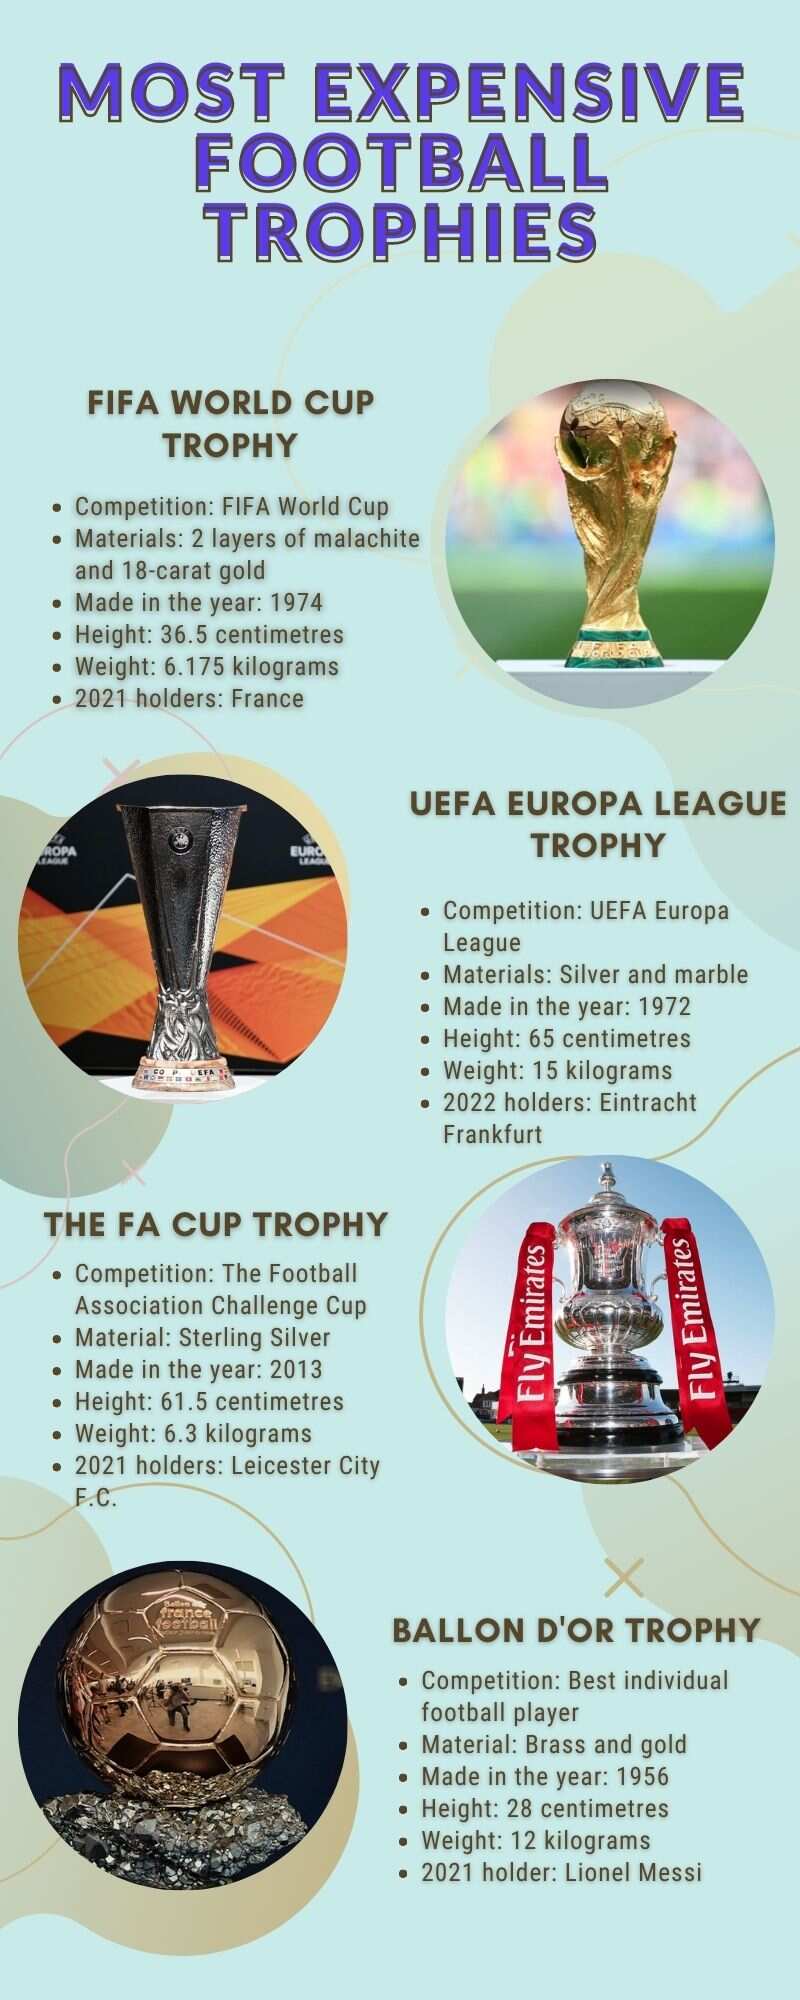 Expensive trophy in football